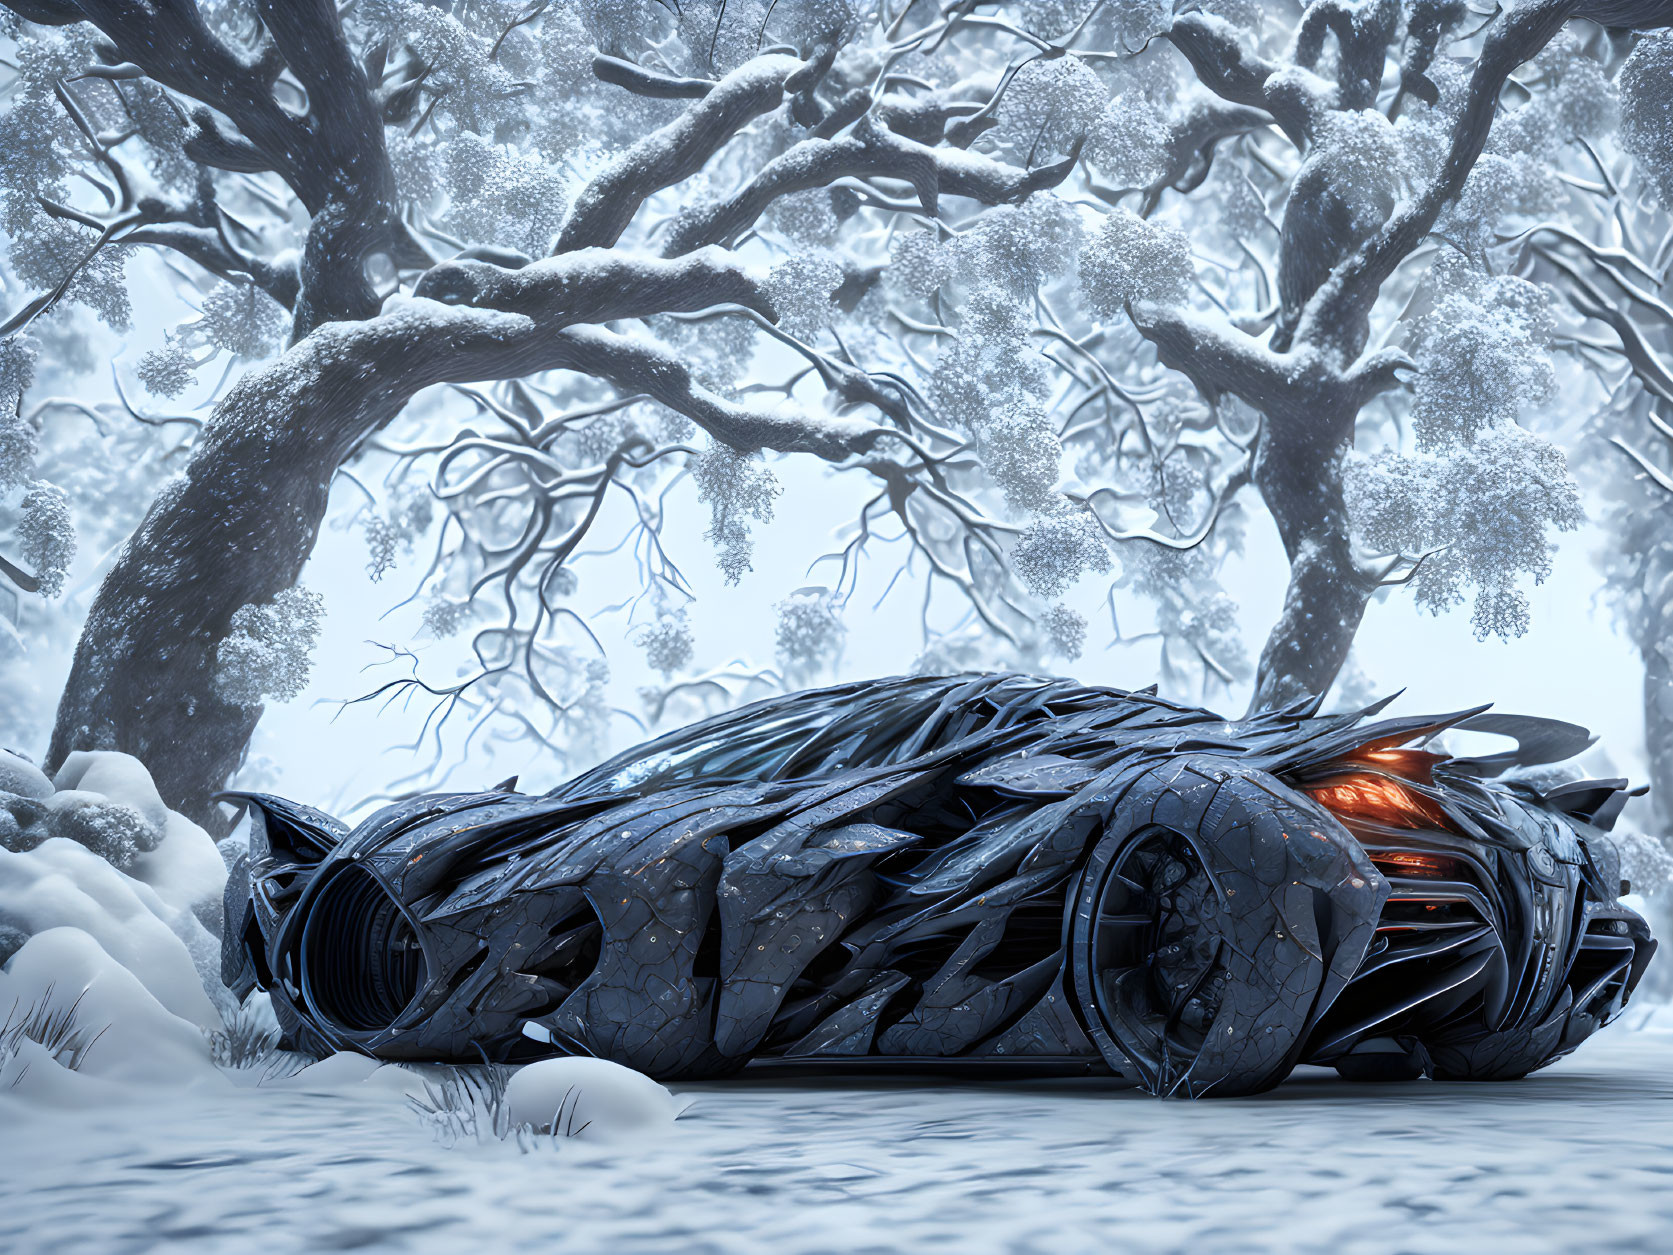 Futuristic organic car in snowy forest with tech-nature blend